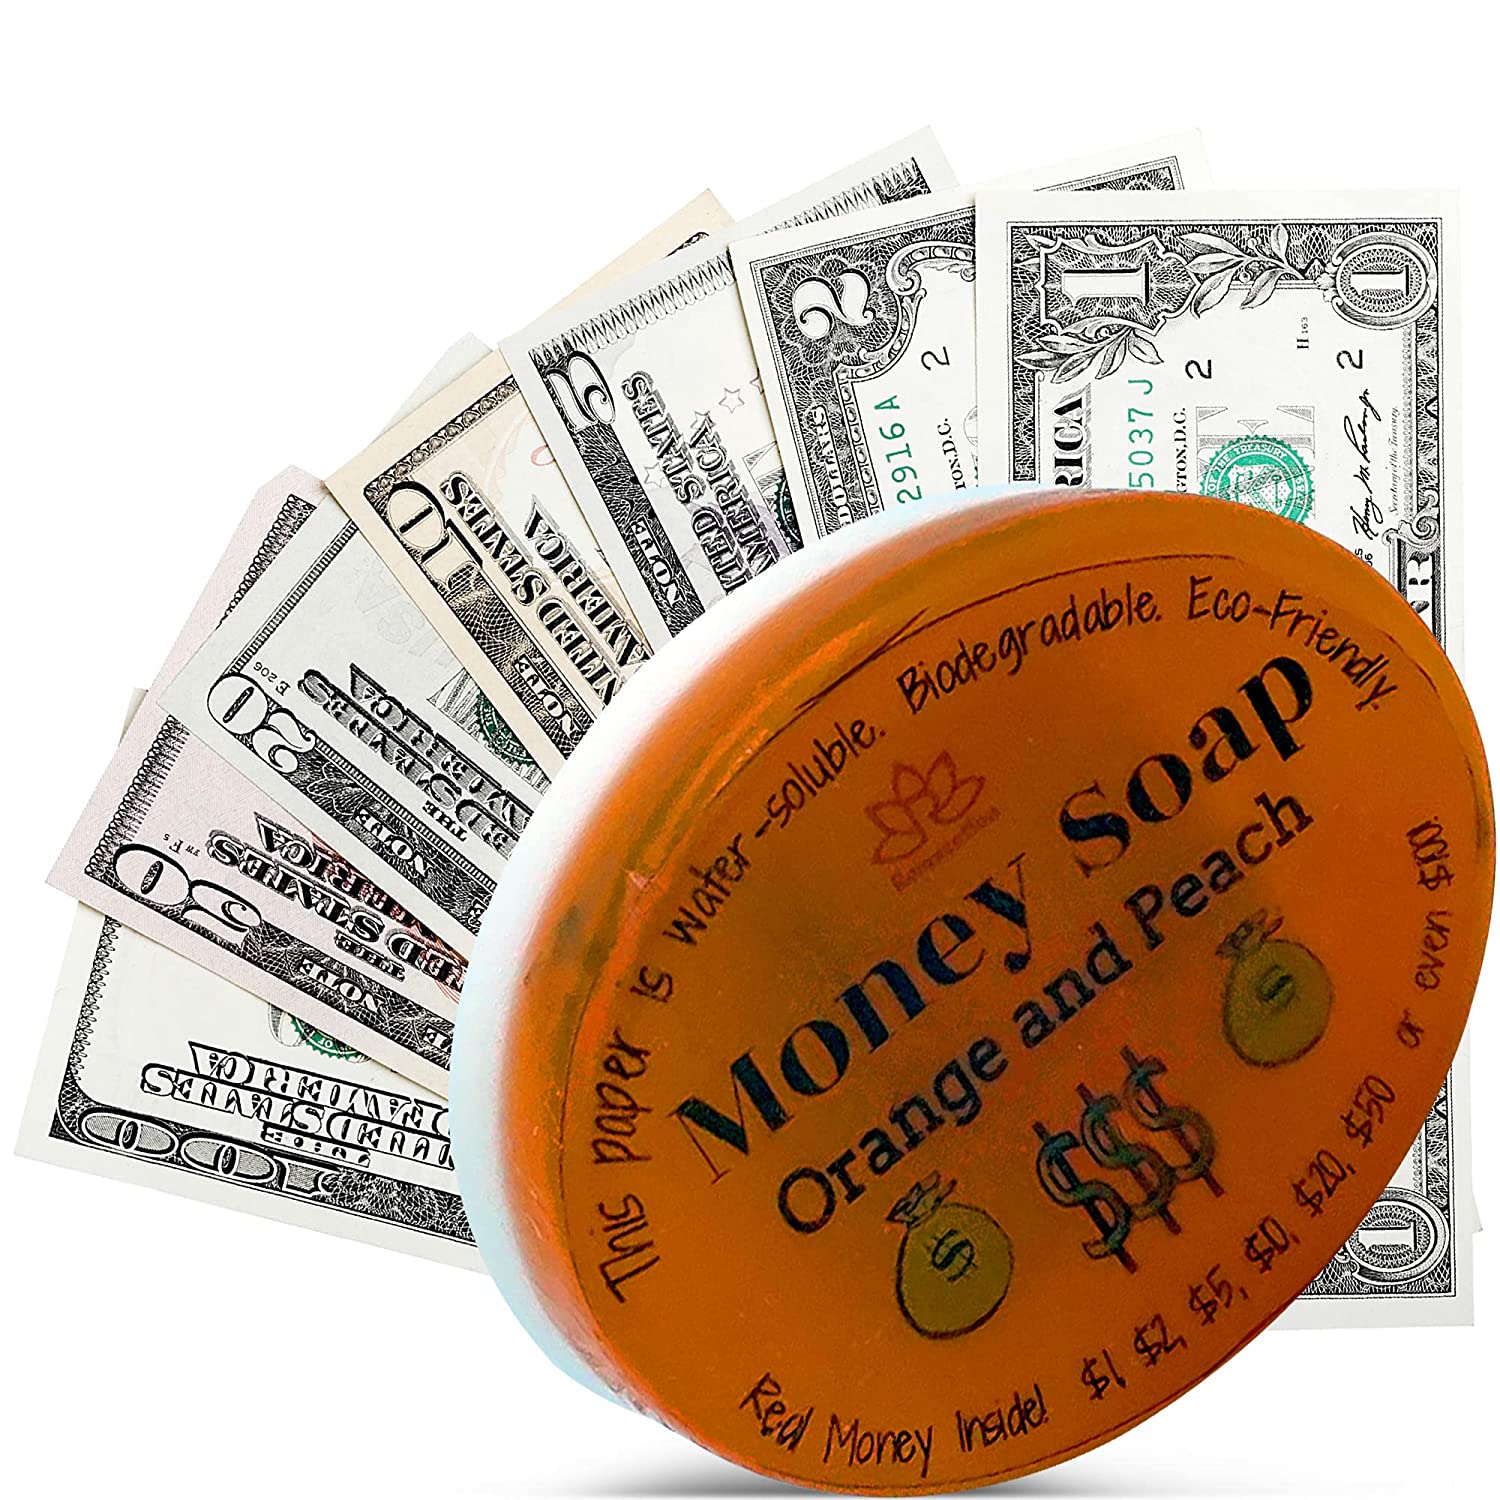 Money Soap Bar with Real Cash Inside Up to $100 Bill Inside in Each Bar -  Shea Butter Soap Refreshing Cucumber and Mint - Gift For Holidays 